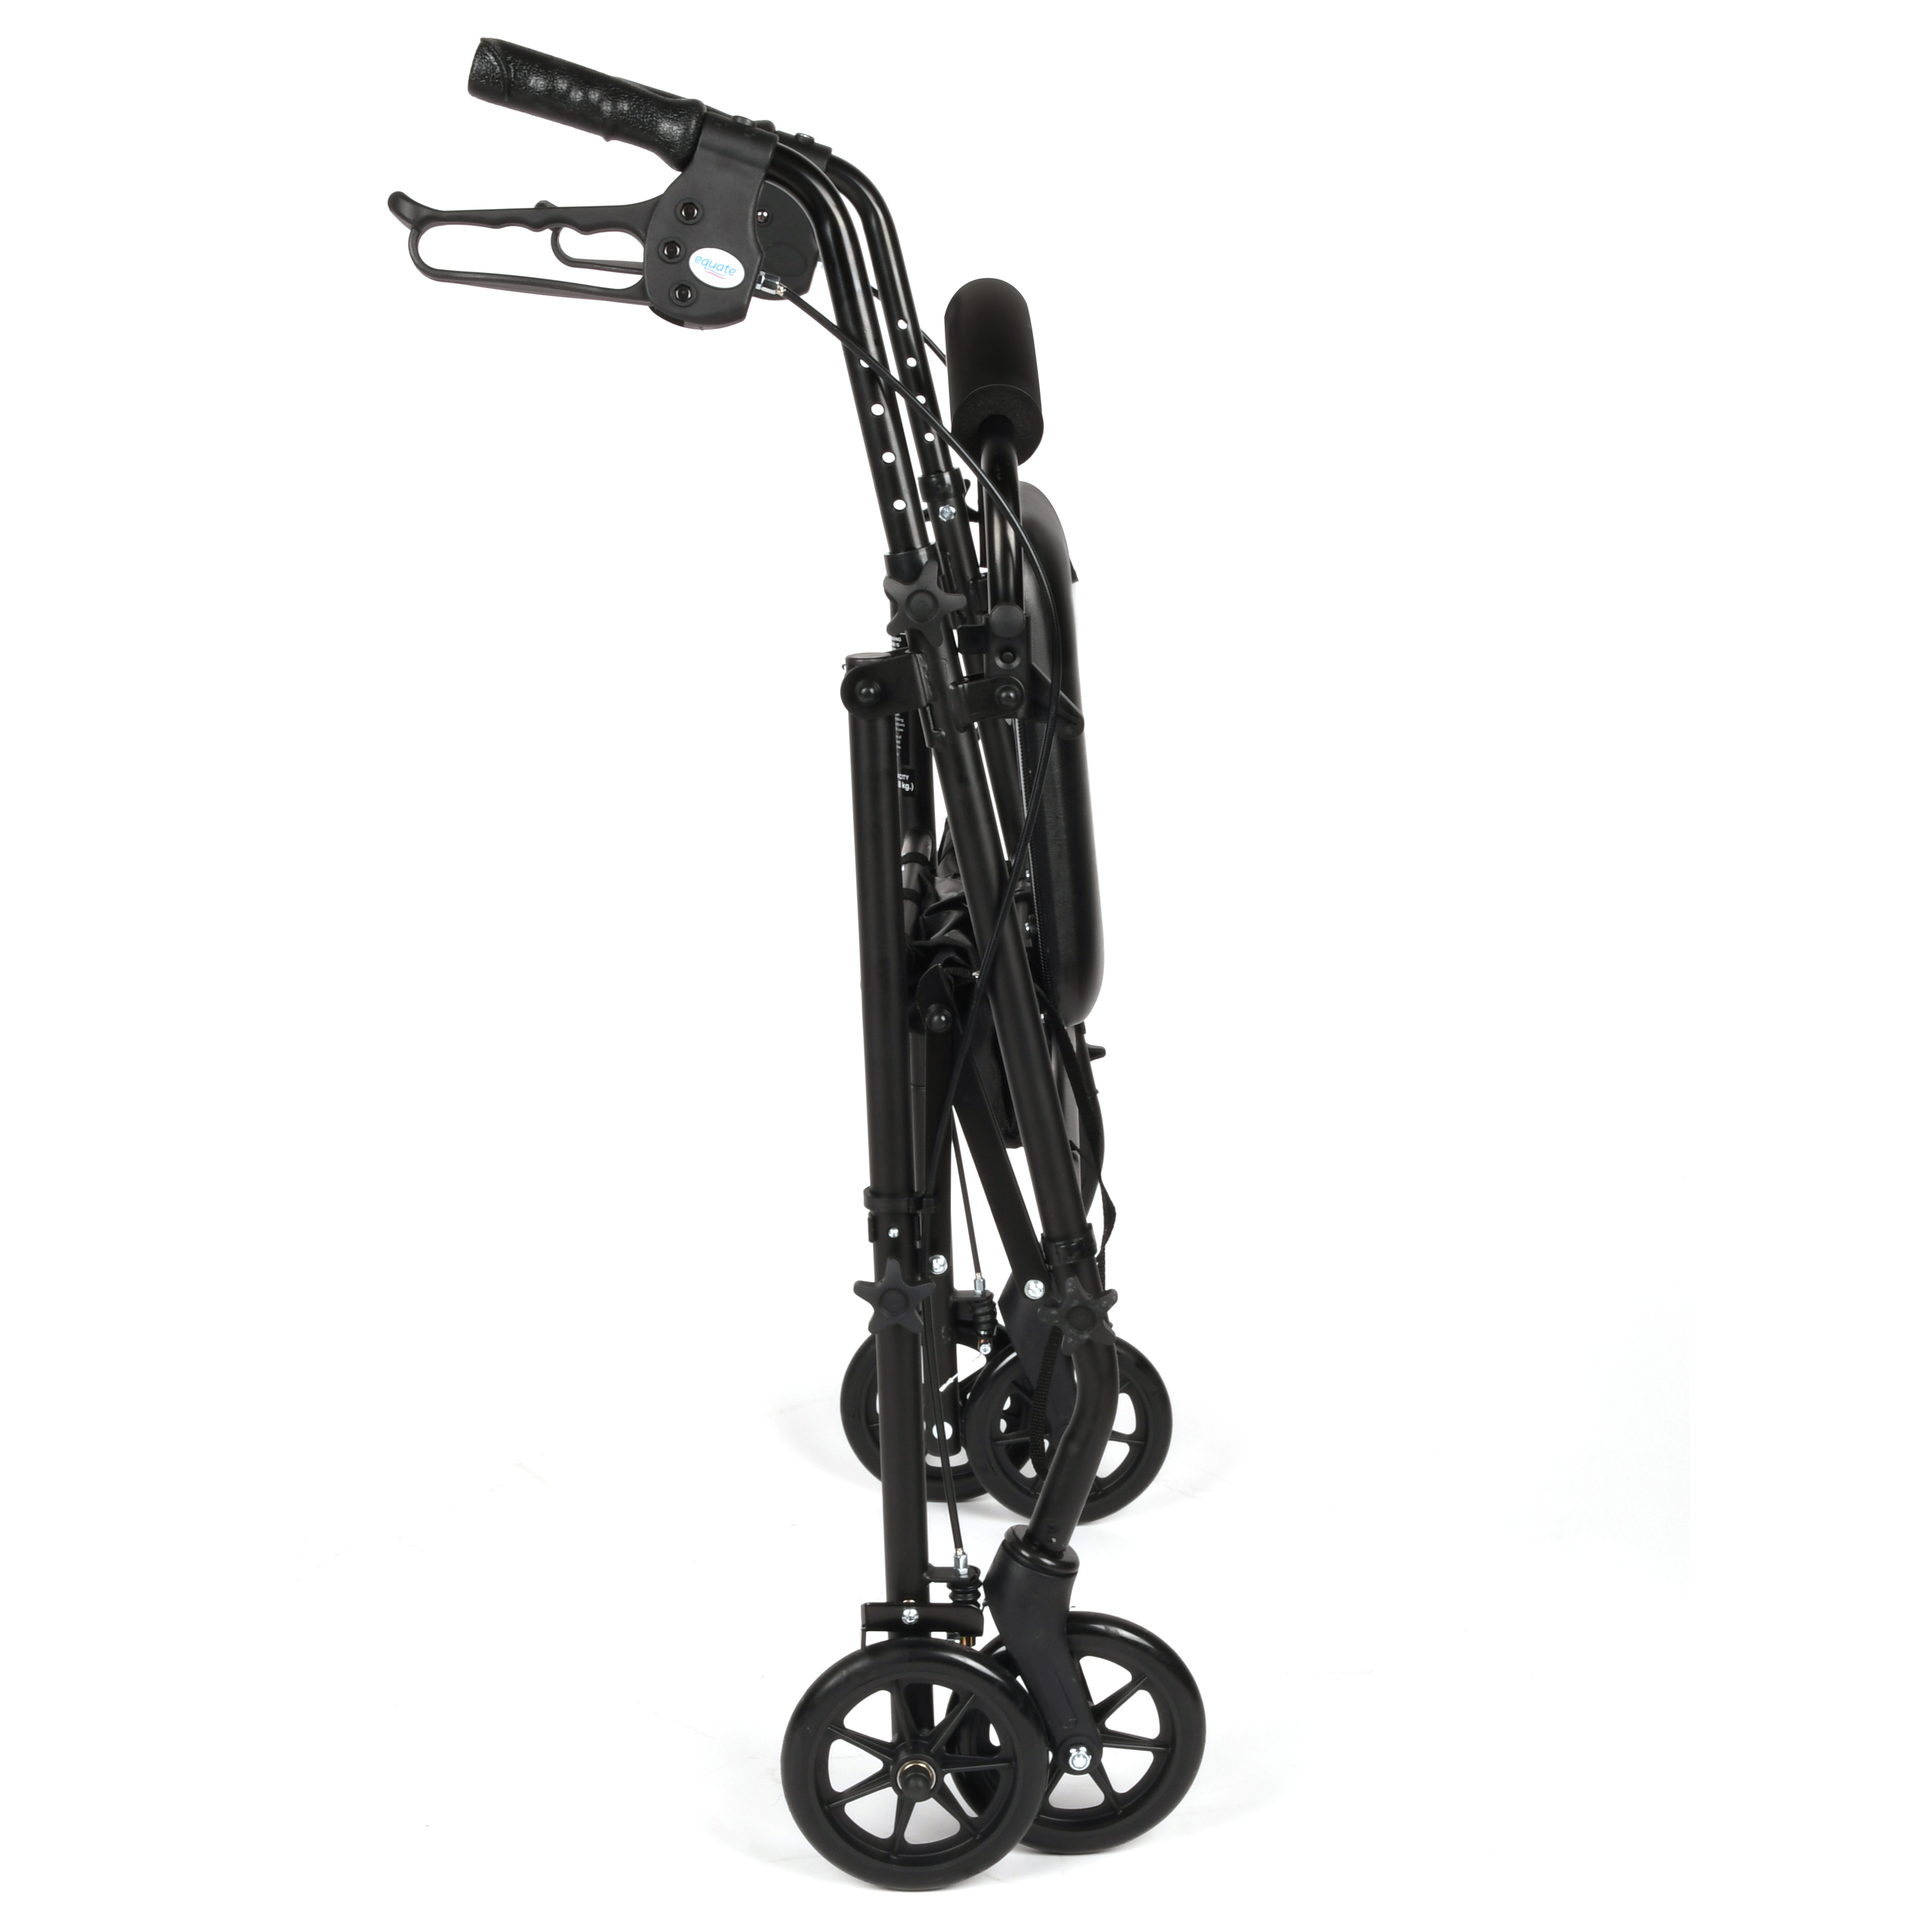 Equate Rolling Walker for Seniors, Rollator with Seat and Wheels, Black, 350 lb Capacity - image 4 of 9